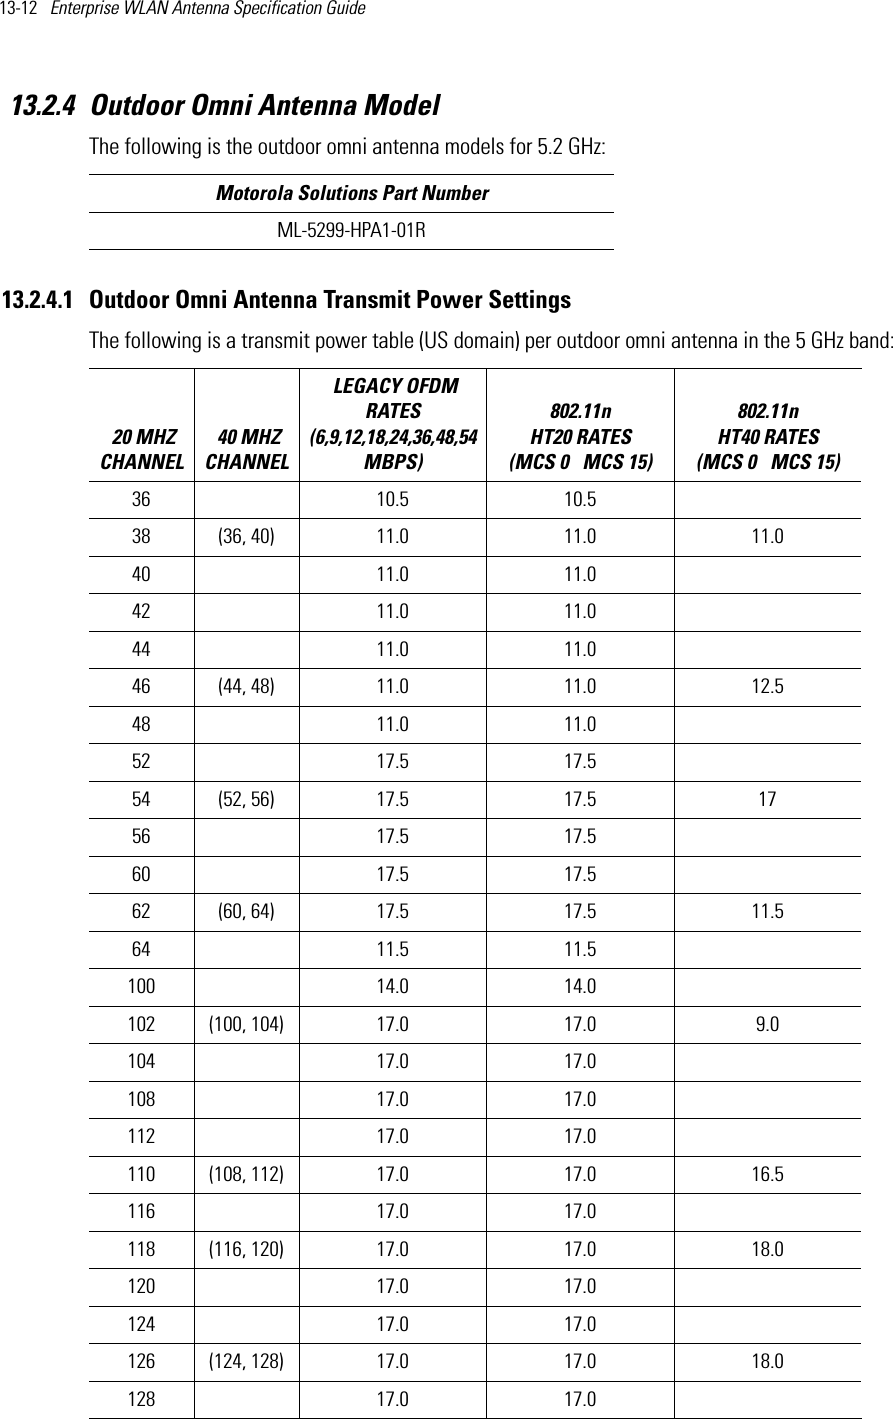 13-12   Enterprise WLAN Antenna Specification Guide 13.2.4 Outdoor Omni Antenna ModelThe following is the outdoor omni antenna models for 5.2 GHz:13.2.4.1 Outdoor Omni Antenna Transmit Power SettingsThe following is a transmit power table (US domain) per outdoor omni antenna in the 5 GHz band:  Motorola Solutions Part NumberML-5299-HPA1-01R 20 MHZ CHANNEL 40 MHZ CHANNEL LEGACY OFDM RATES (6,9,12,18,24,36,48,54 MBPS) 802.11n HT20 RATES (MCS 0   MCS 15)802.11n HT40 RATES (MCS 0   MCS 15) 36 10.5 10.538 (36, 40) 11.0 11.0 11.040 11.0 11.042 11.0 11.044 11.0 11.046 (44, 48) 11.0 11.0 12.548 11.0 11.052 17.5 17.554 (52, 56) 17.5 17.5 1756 17.5 17.560 17.5 17.562 (60, 64) 17.5 17.5 11.564 11.5 11.5100 14.0 14.0102 (100, 104) 17.0 17.0 9.0104 17.0 17.0108 17.0 17.0112 17.0 17.0110 (108, 112) 17.0 17.0 16.5116 17.0 17.0118 (116, 120) 17.0 17.0 18.0120 17.0 17.0124 17.0 17.0126 (124, 128) 17.0 17.0 18.0128 17.0 17.0